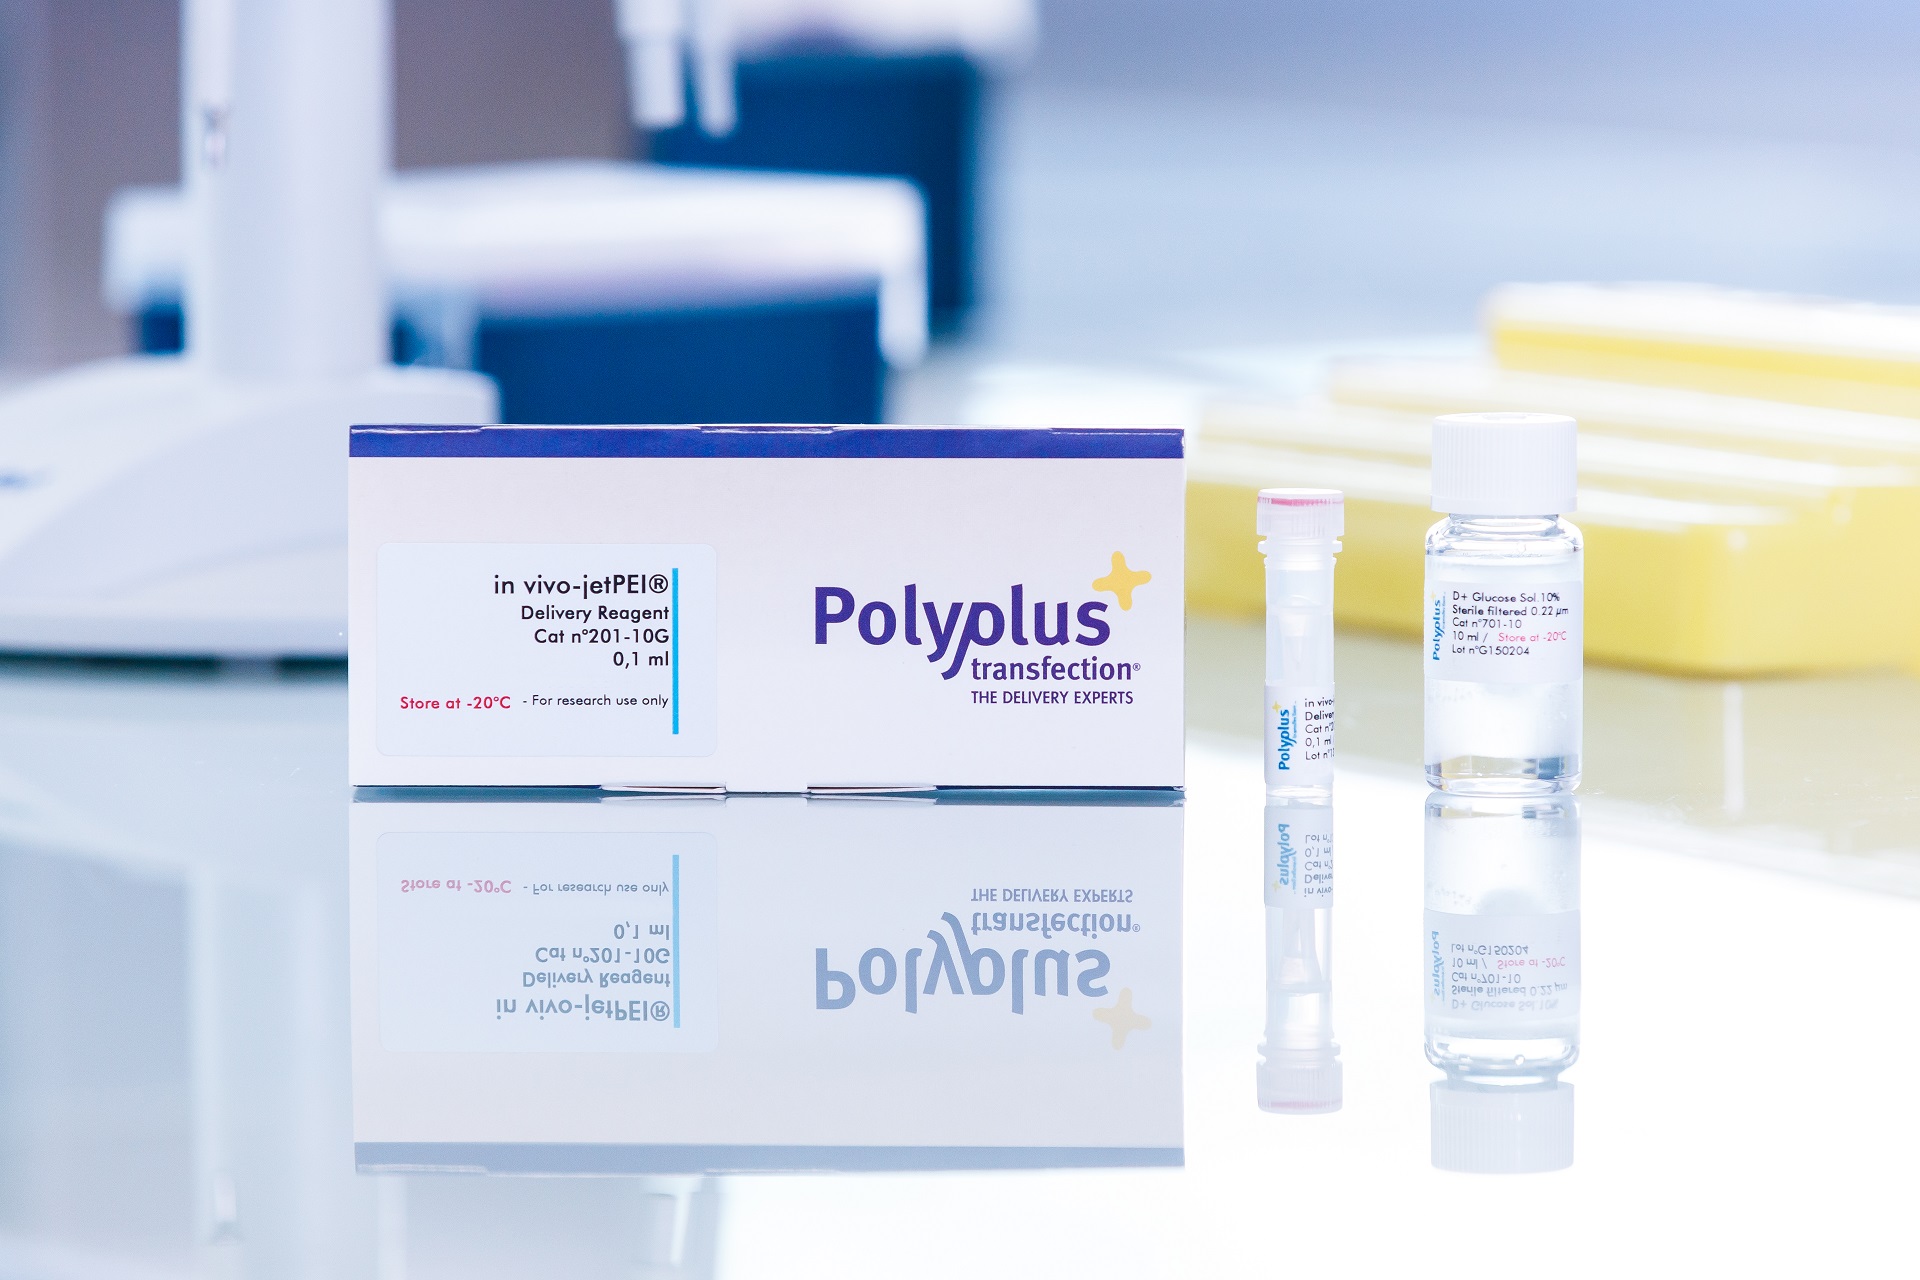 Senesco Signs A Supply Agreement For Polyplus-transfection’s Delivery System